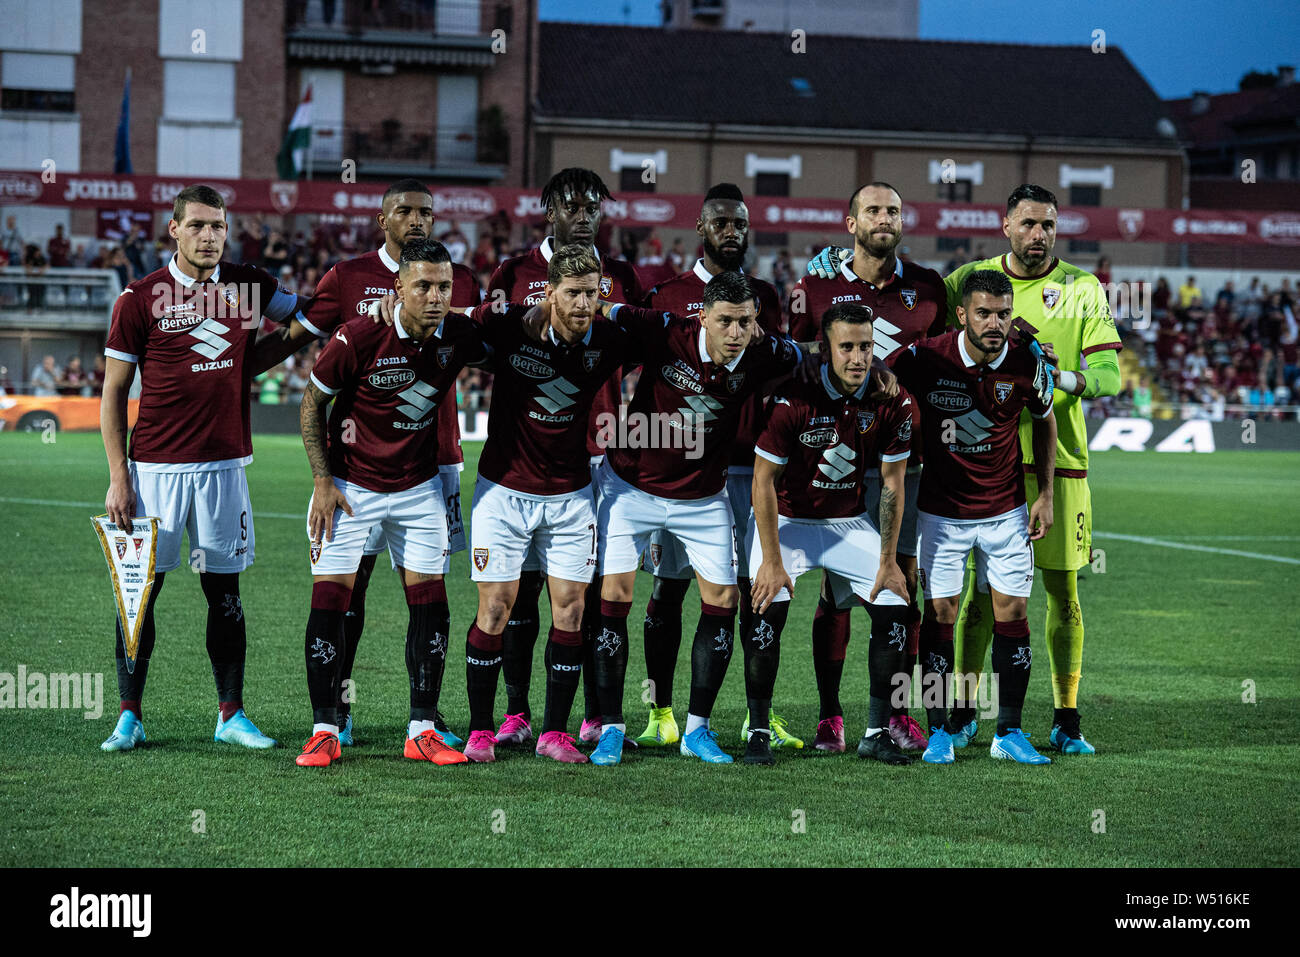 Alessadria, Italy. 25th July, 2019. Torino FC team poses during the Europa  League, football Match. Torino FC vs Debrecen. Torino FC won 3-0 in  Alessandria, Italy at stadio Moccagatta on 25th July